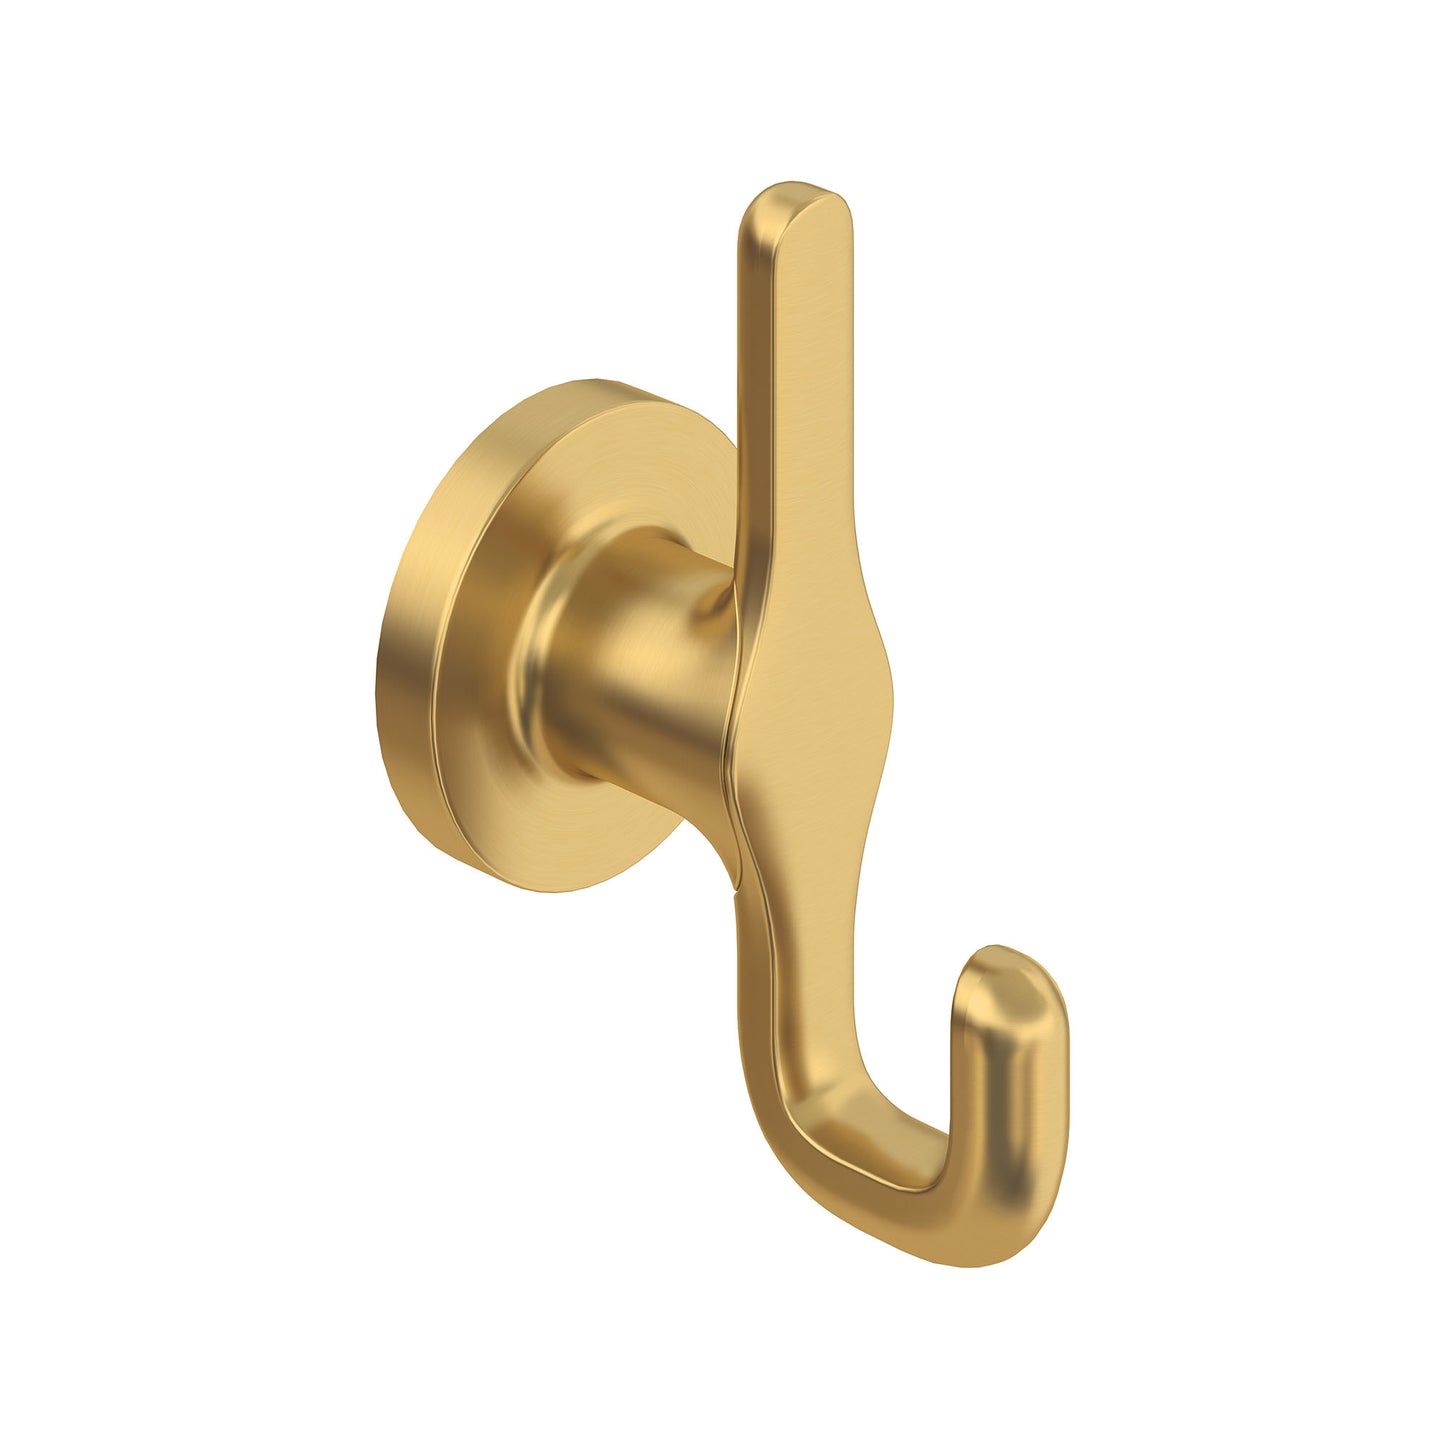 AMERICAN-STANDARD 7105210.GN0, Studio S Double Robe Hook in Grohe Brushed Cool Sunrise